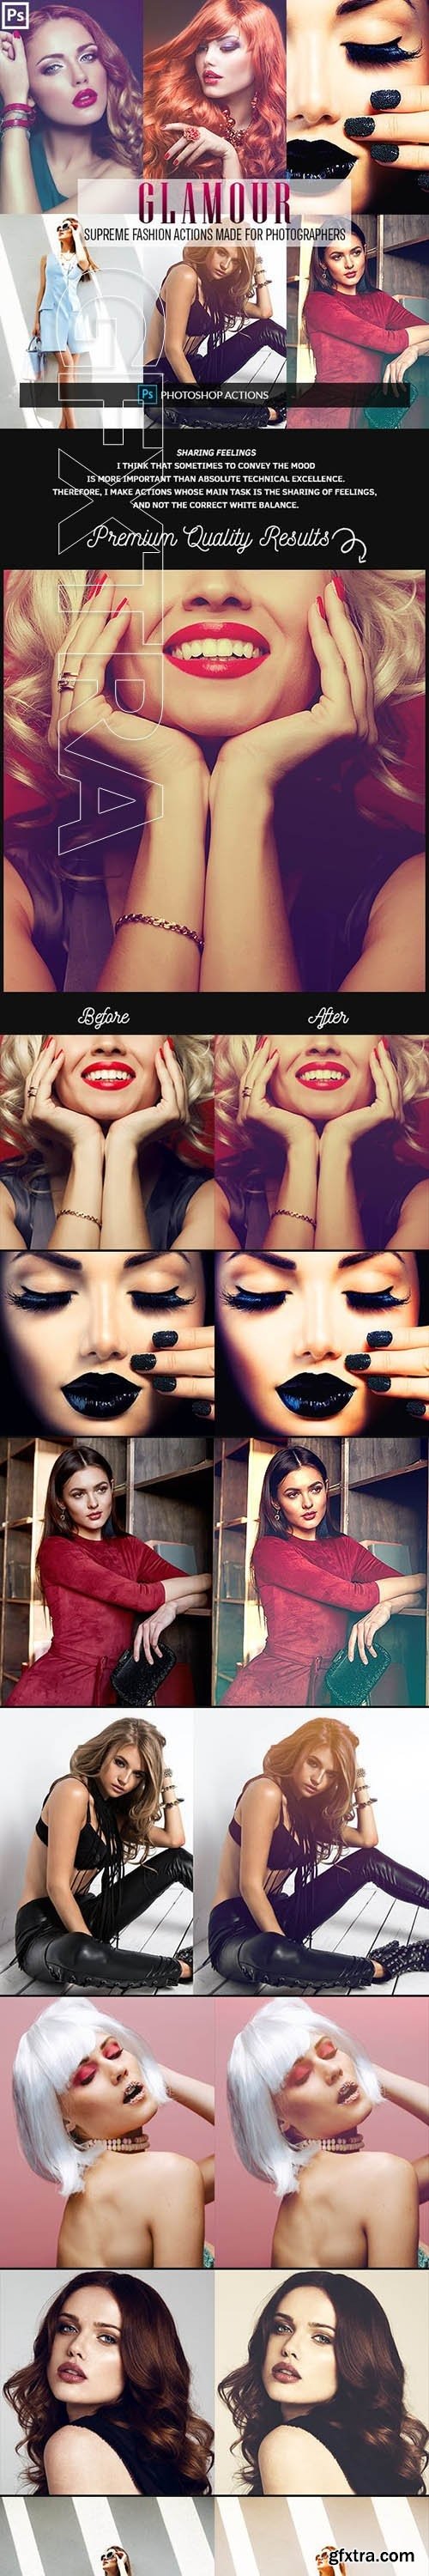 GraphicRiver - Glamour Fashion Photoshop Actions 23156099